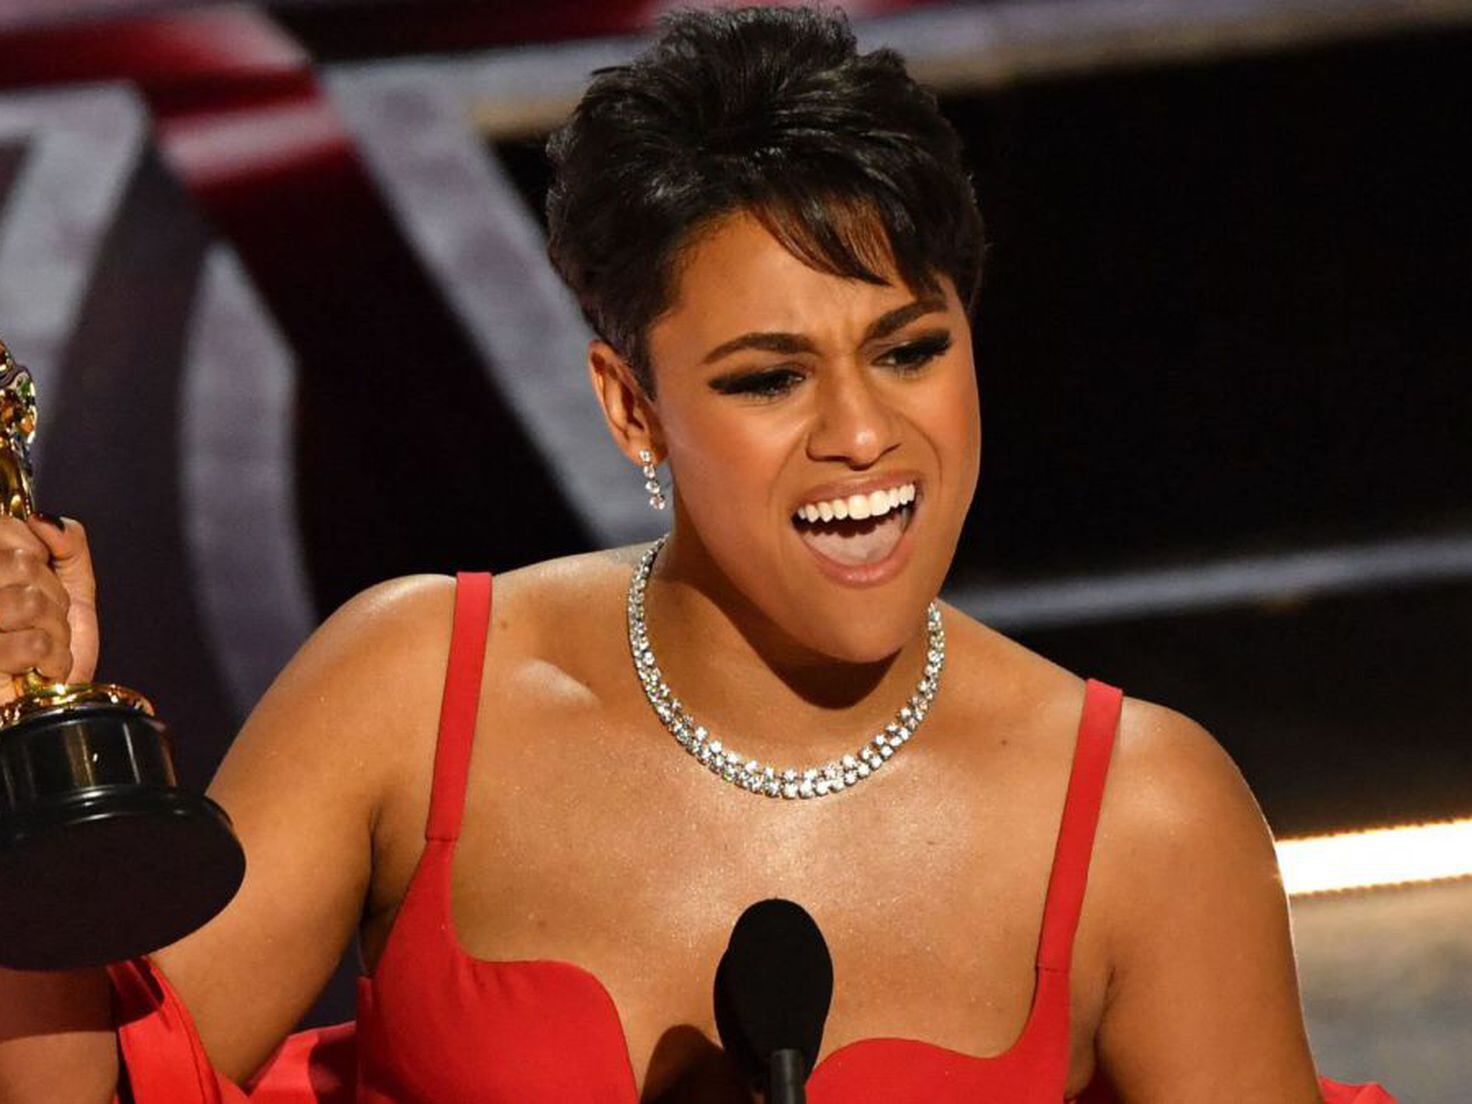 6 Best Speeches From the Critics' Choice Awards - Parade